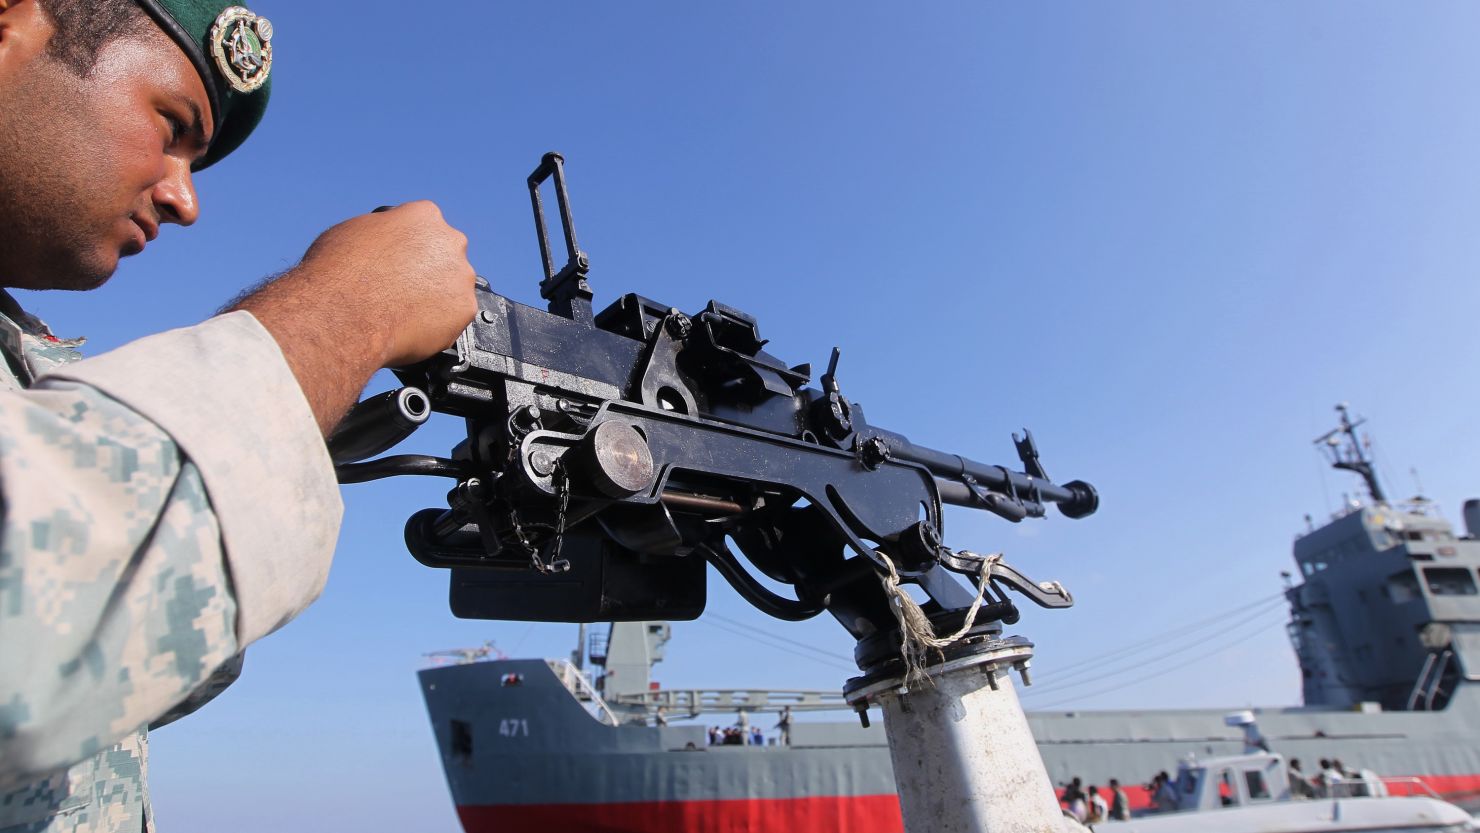 A soldier stands guard on a military speed boat during Iran's navy exercises in the Strait of Hormuz on December 28, 2011.